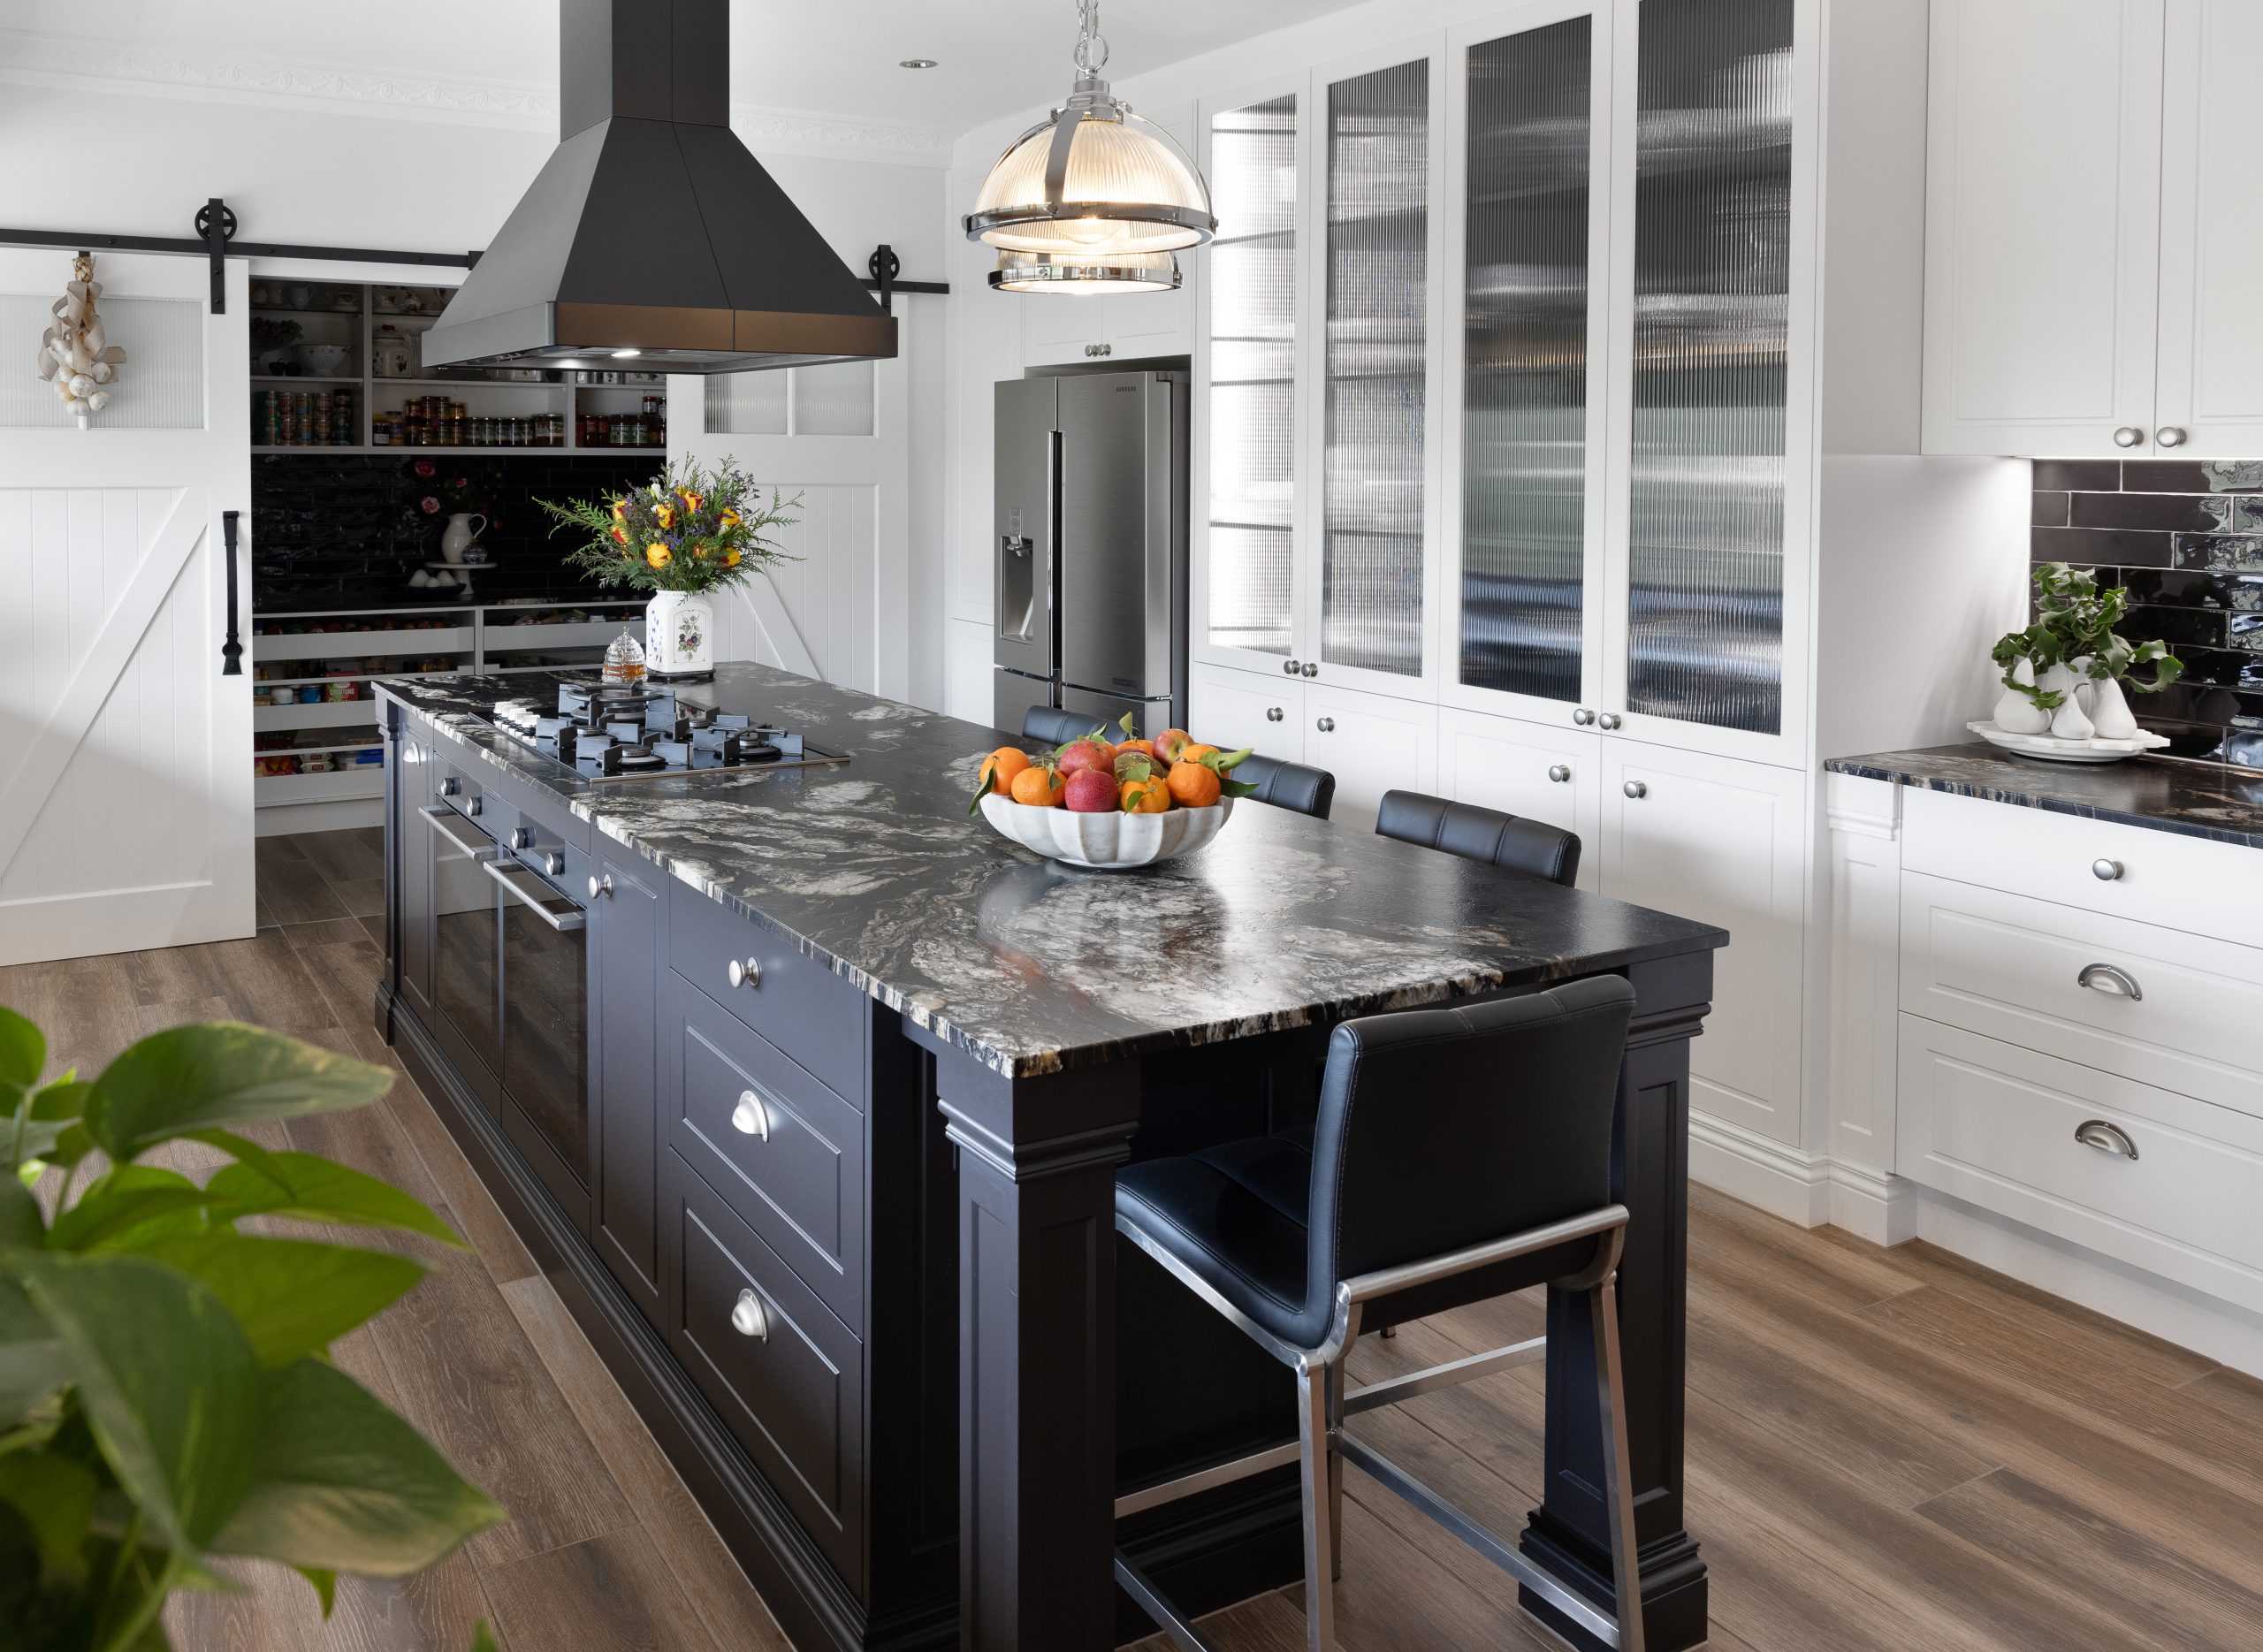 Luxury kitchen cabinets playing a decisive, foundation role in the culinary space.